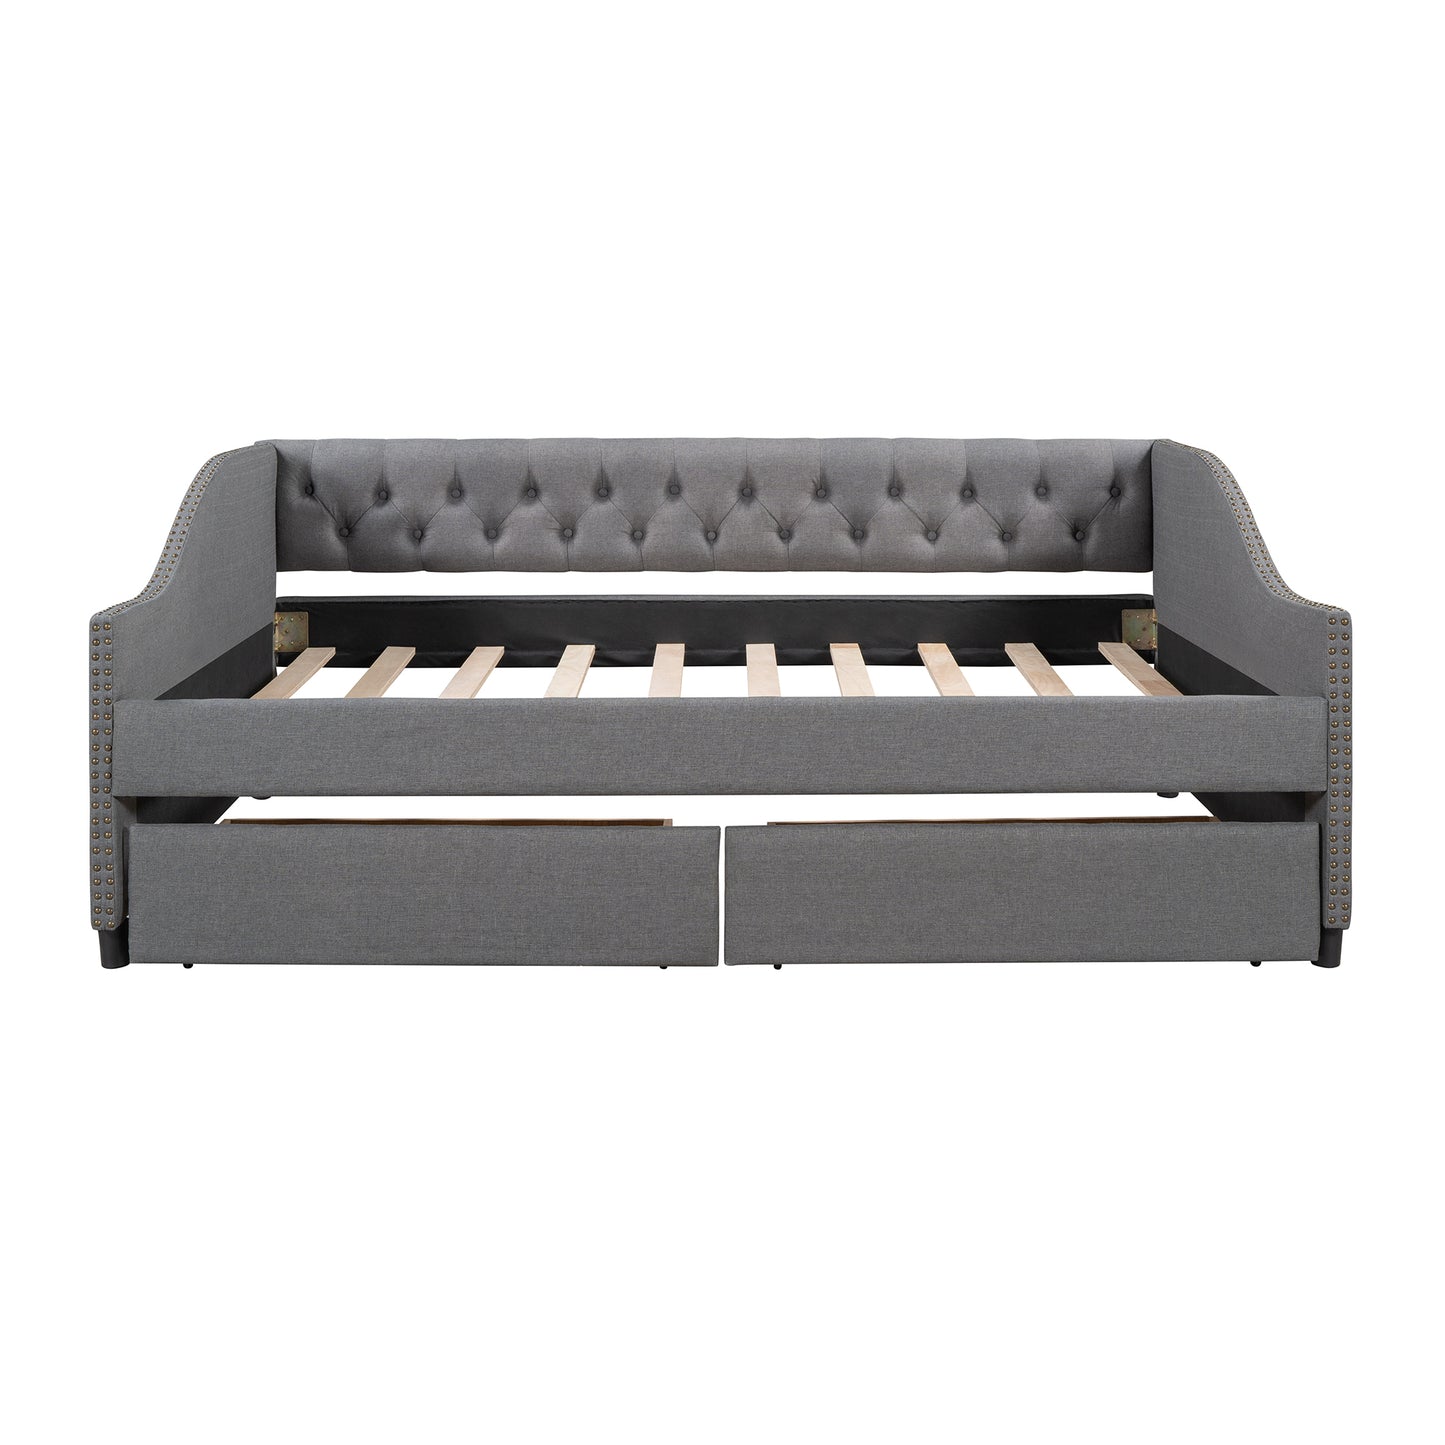 Upholstered daybed with Two Drawers, Wood Slat Support, Gray, Full Size